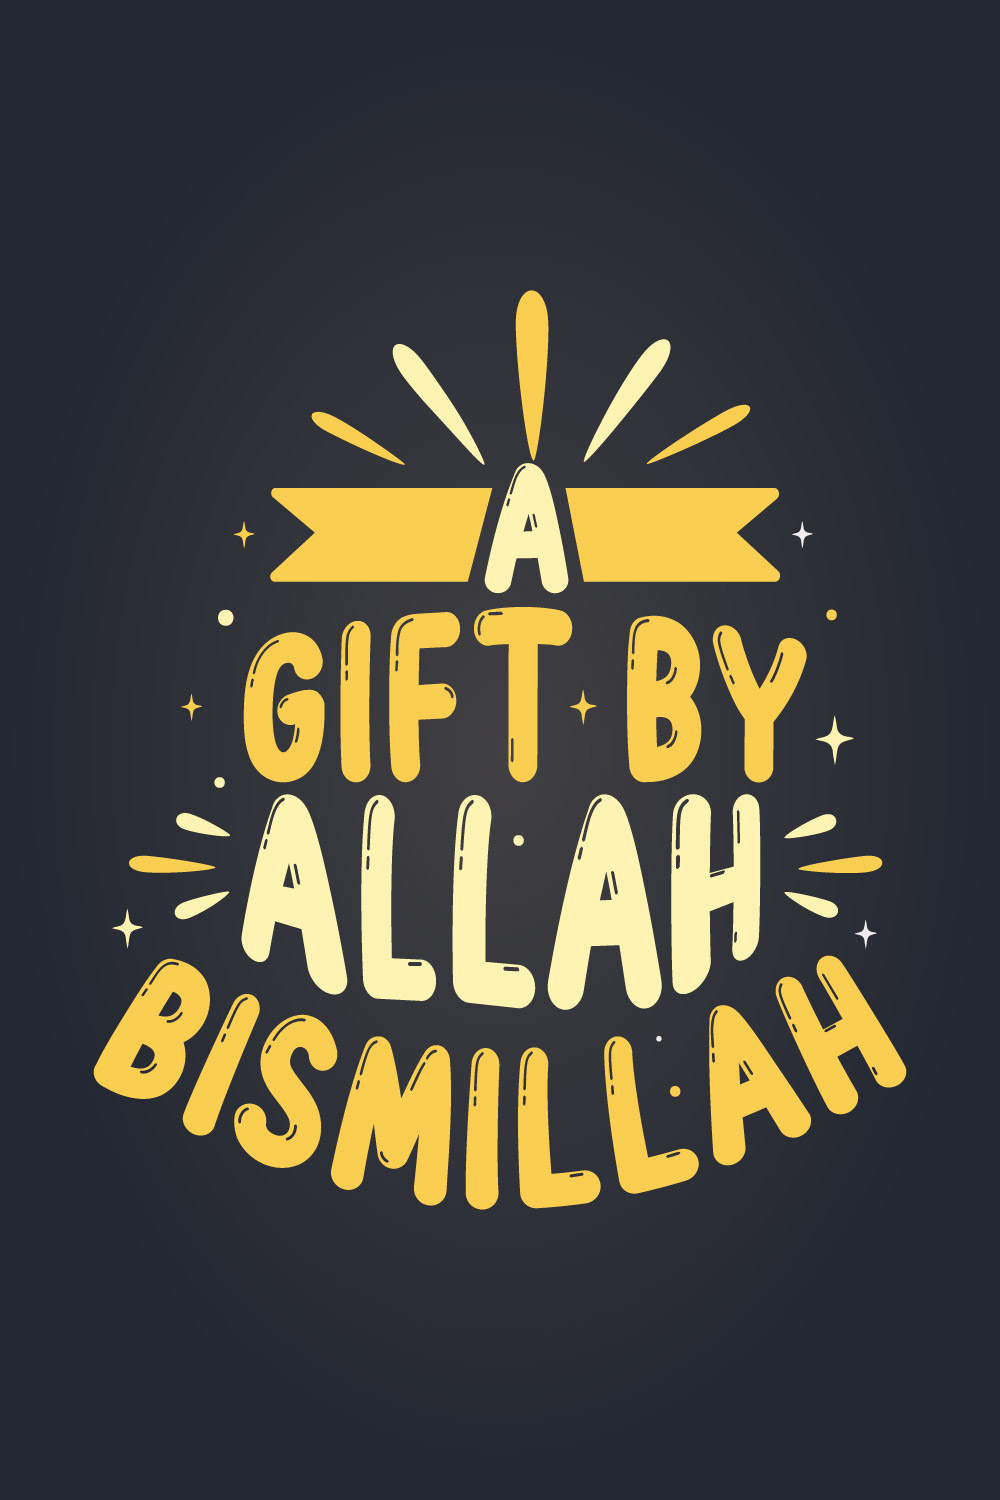 A Gift By Allah Bismillah Islamic Muslim Quote holy month lettering typography T shirt design pinterest preview image.